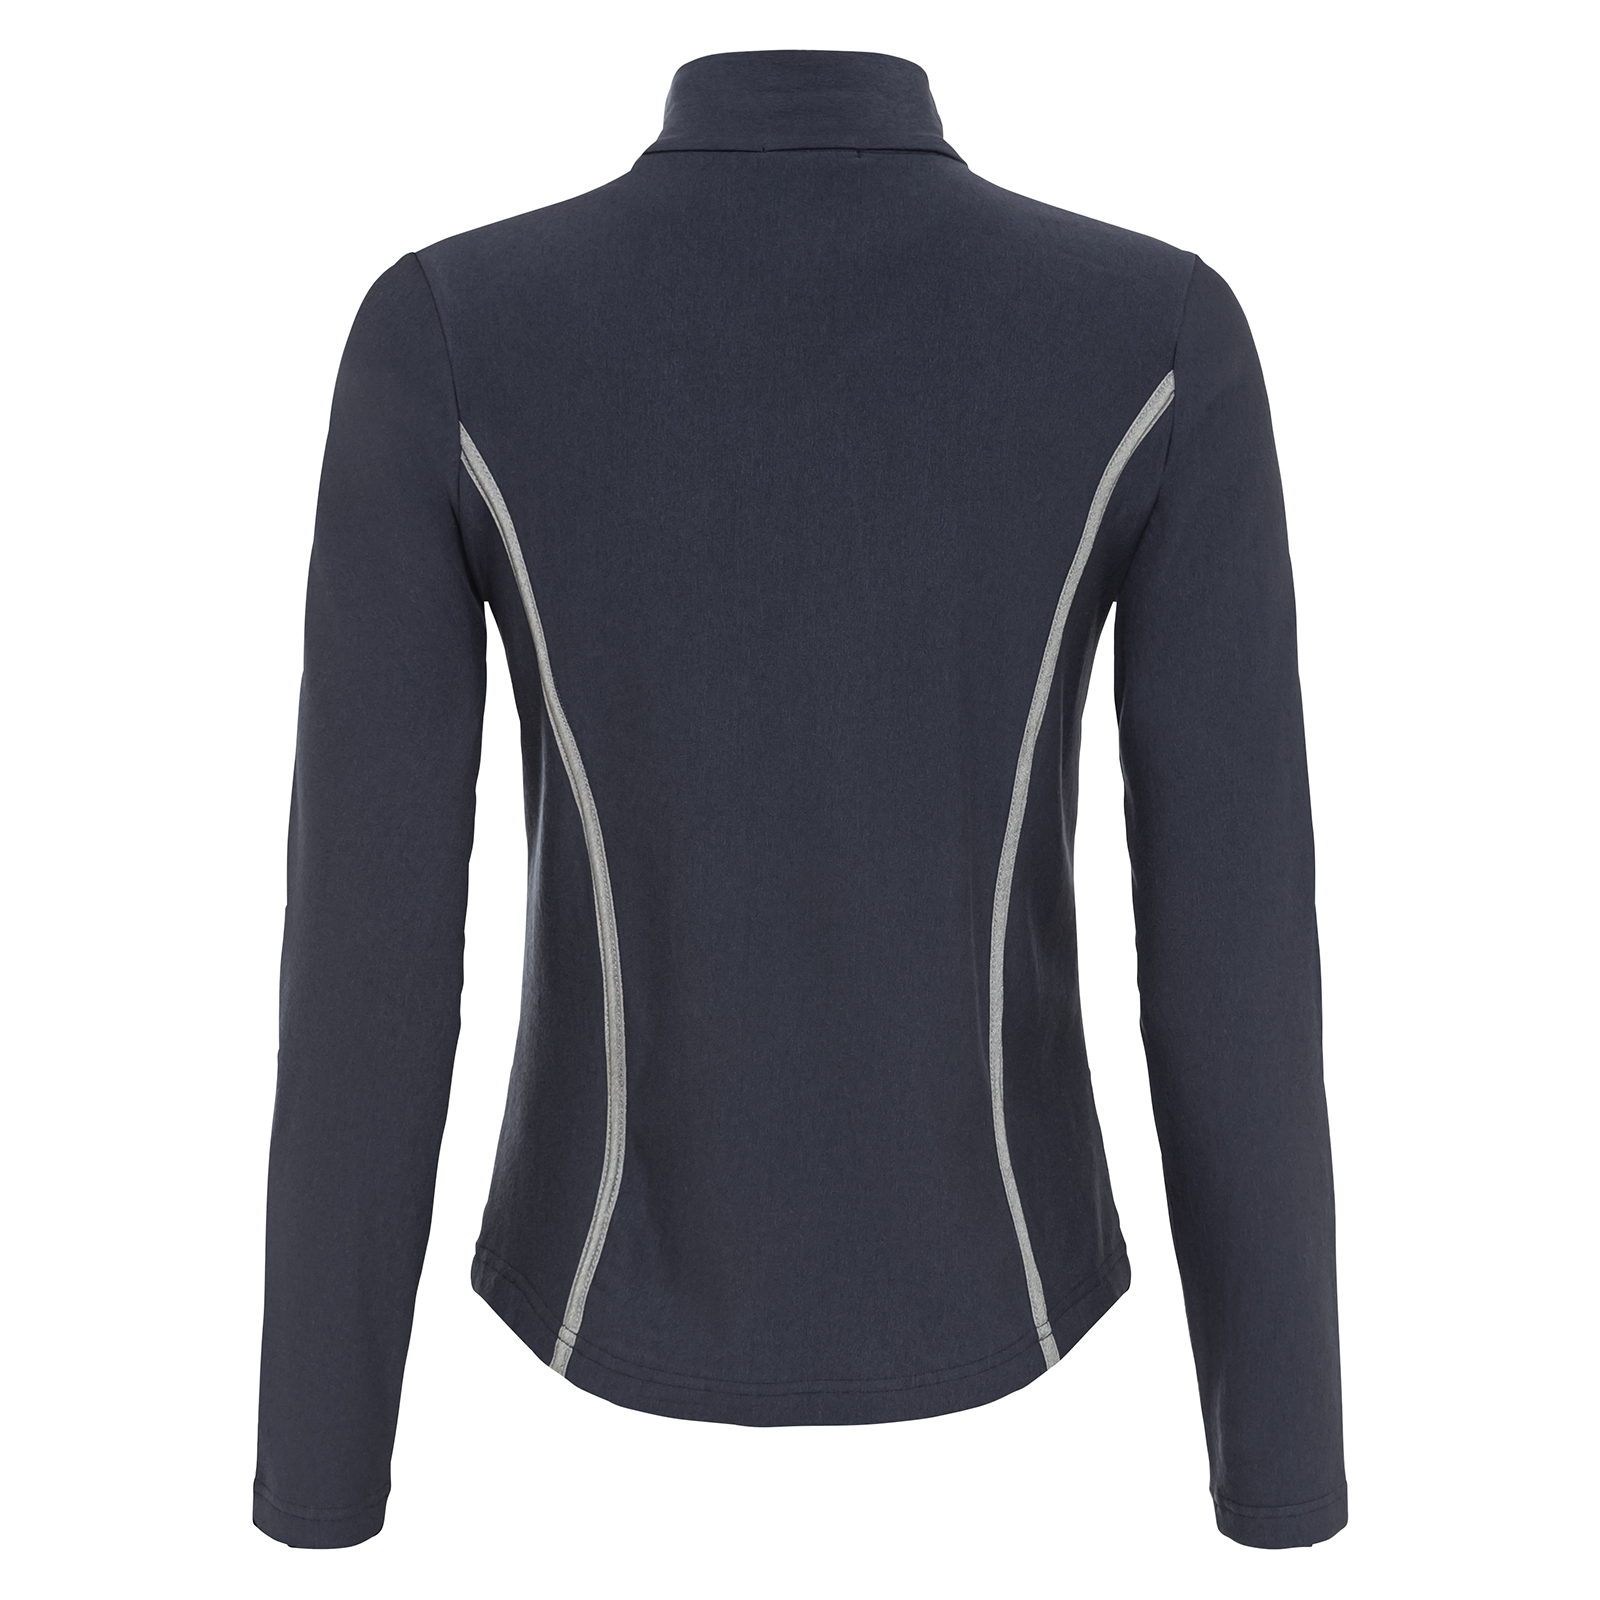 Ladies' golf sweater with Tencel component